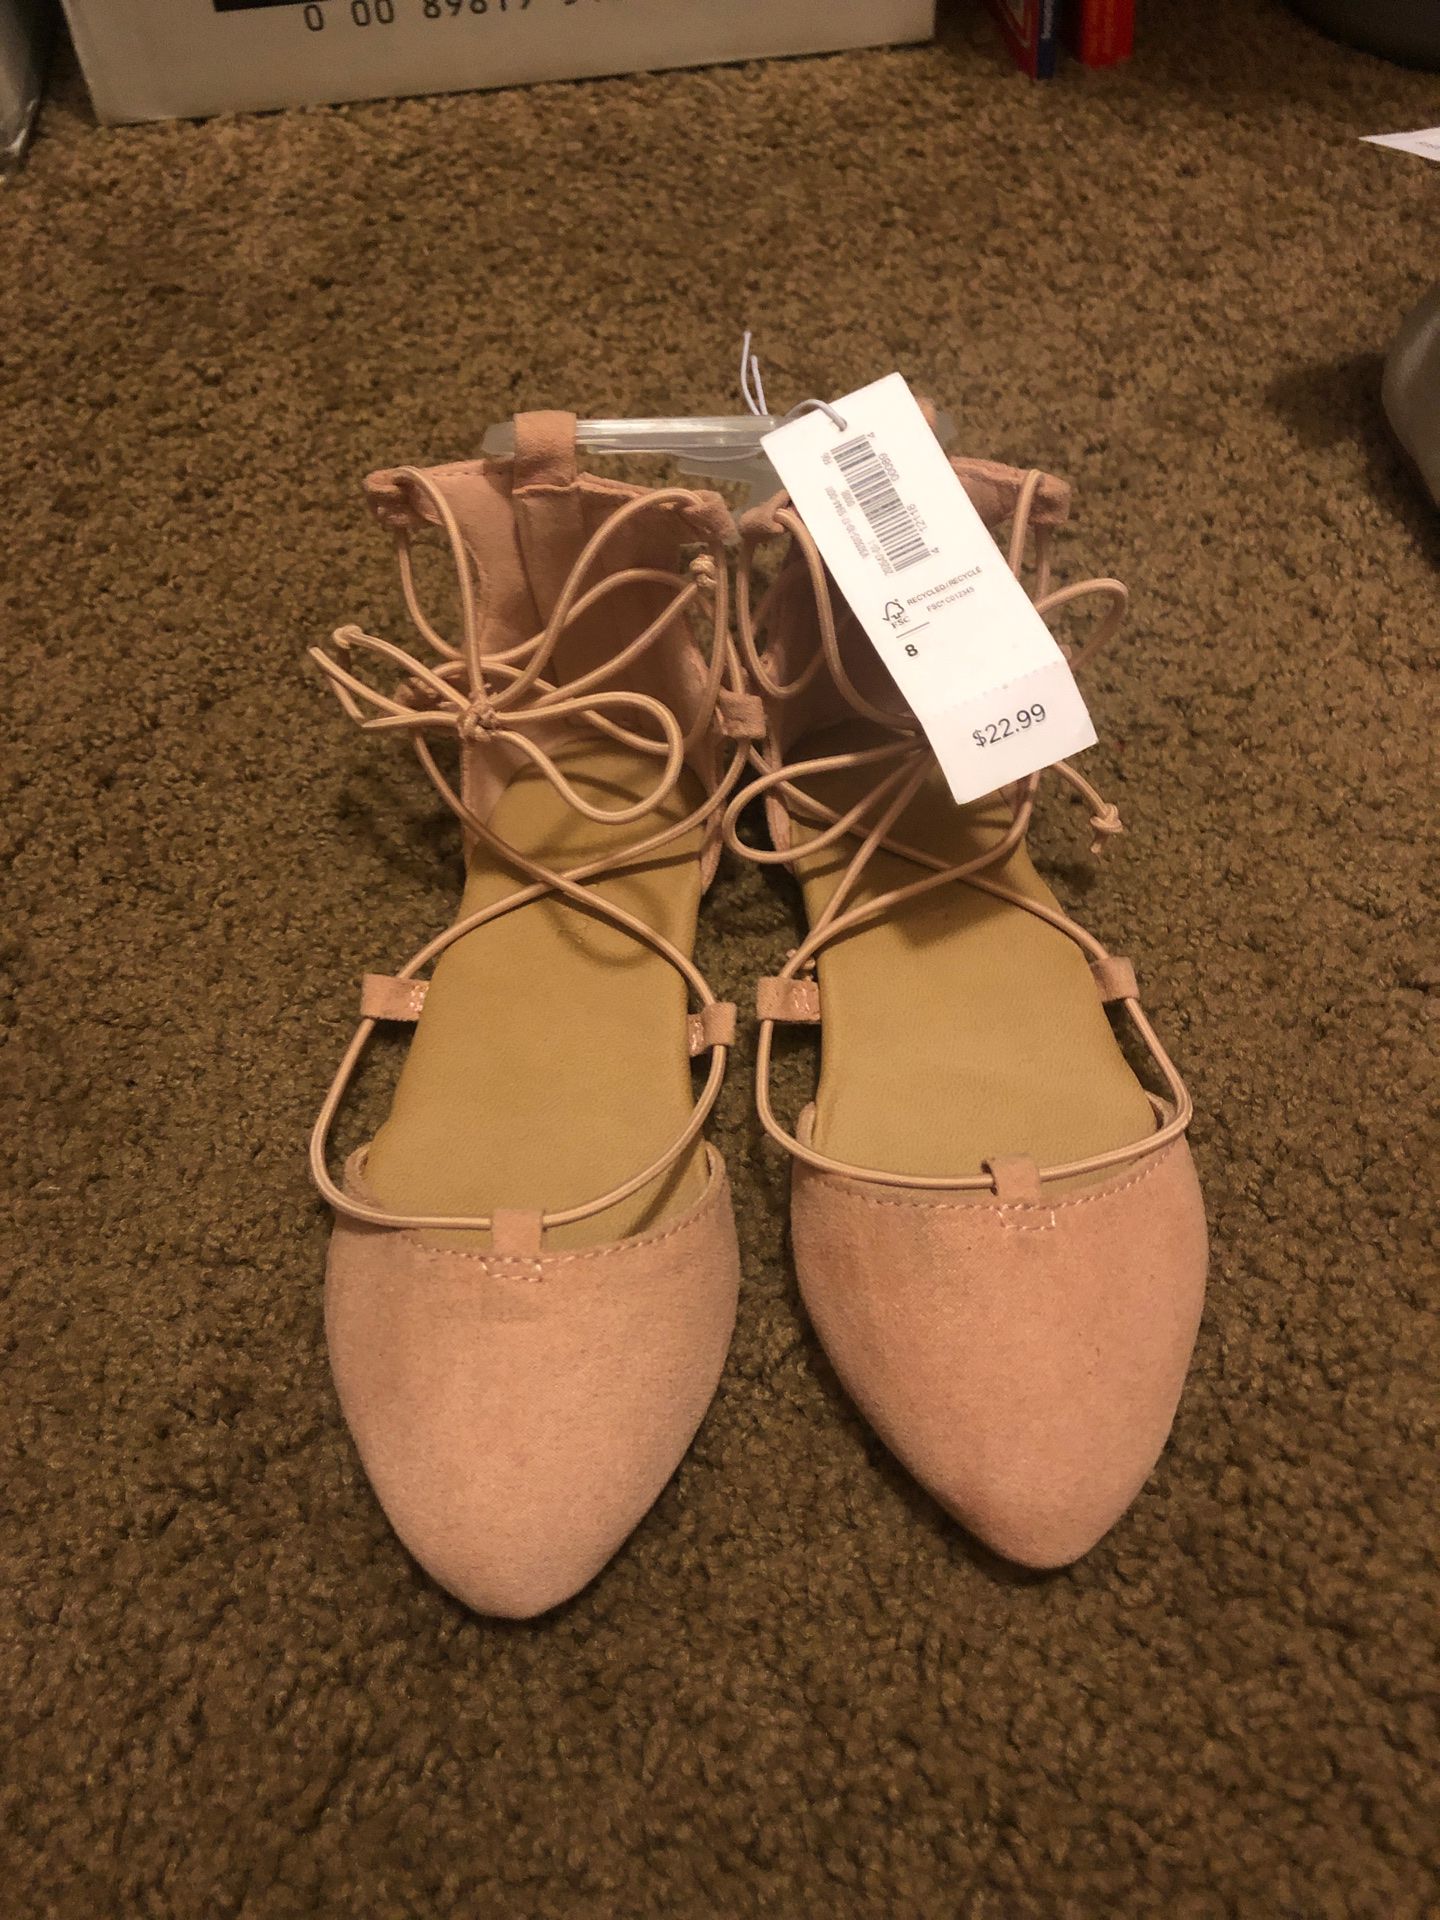 Old Navy Ballerina Flats Toddler Girl Shoes Size 8 - NEW